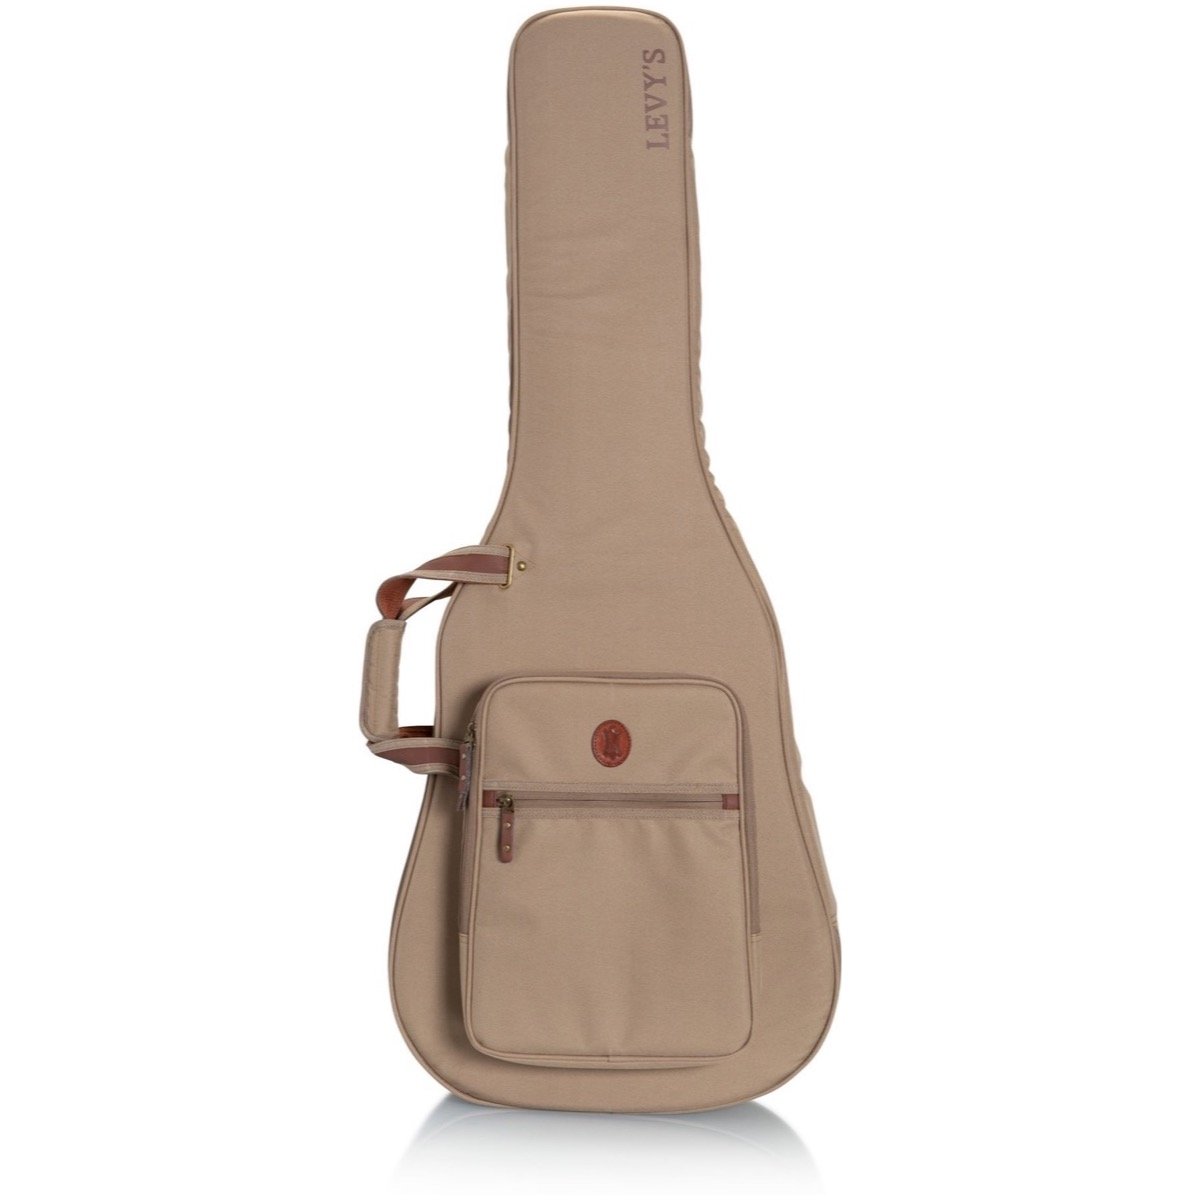 Levy's 200 Series Deluxe Dreadnought Acoustic Guitar Gig Bag, Tan